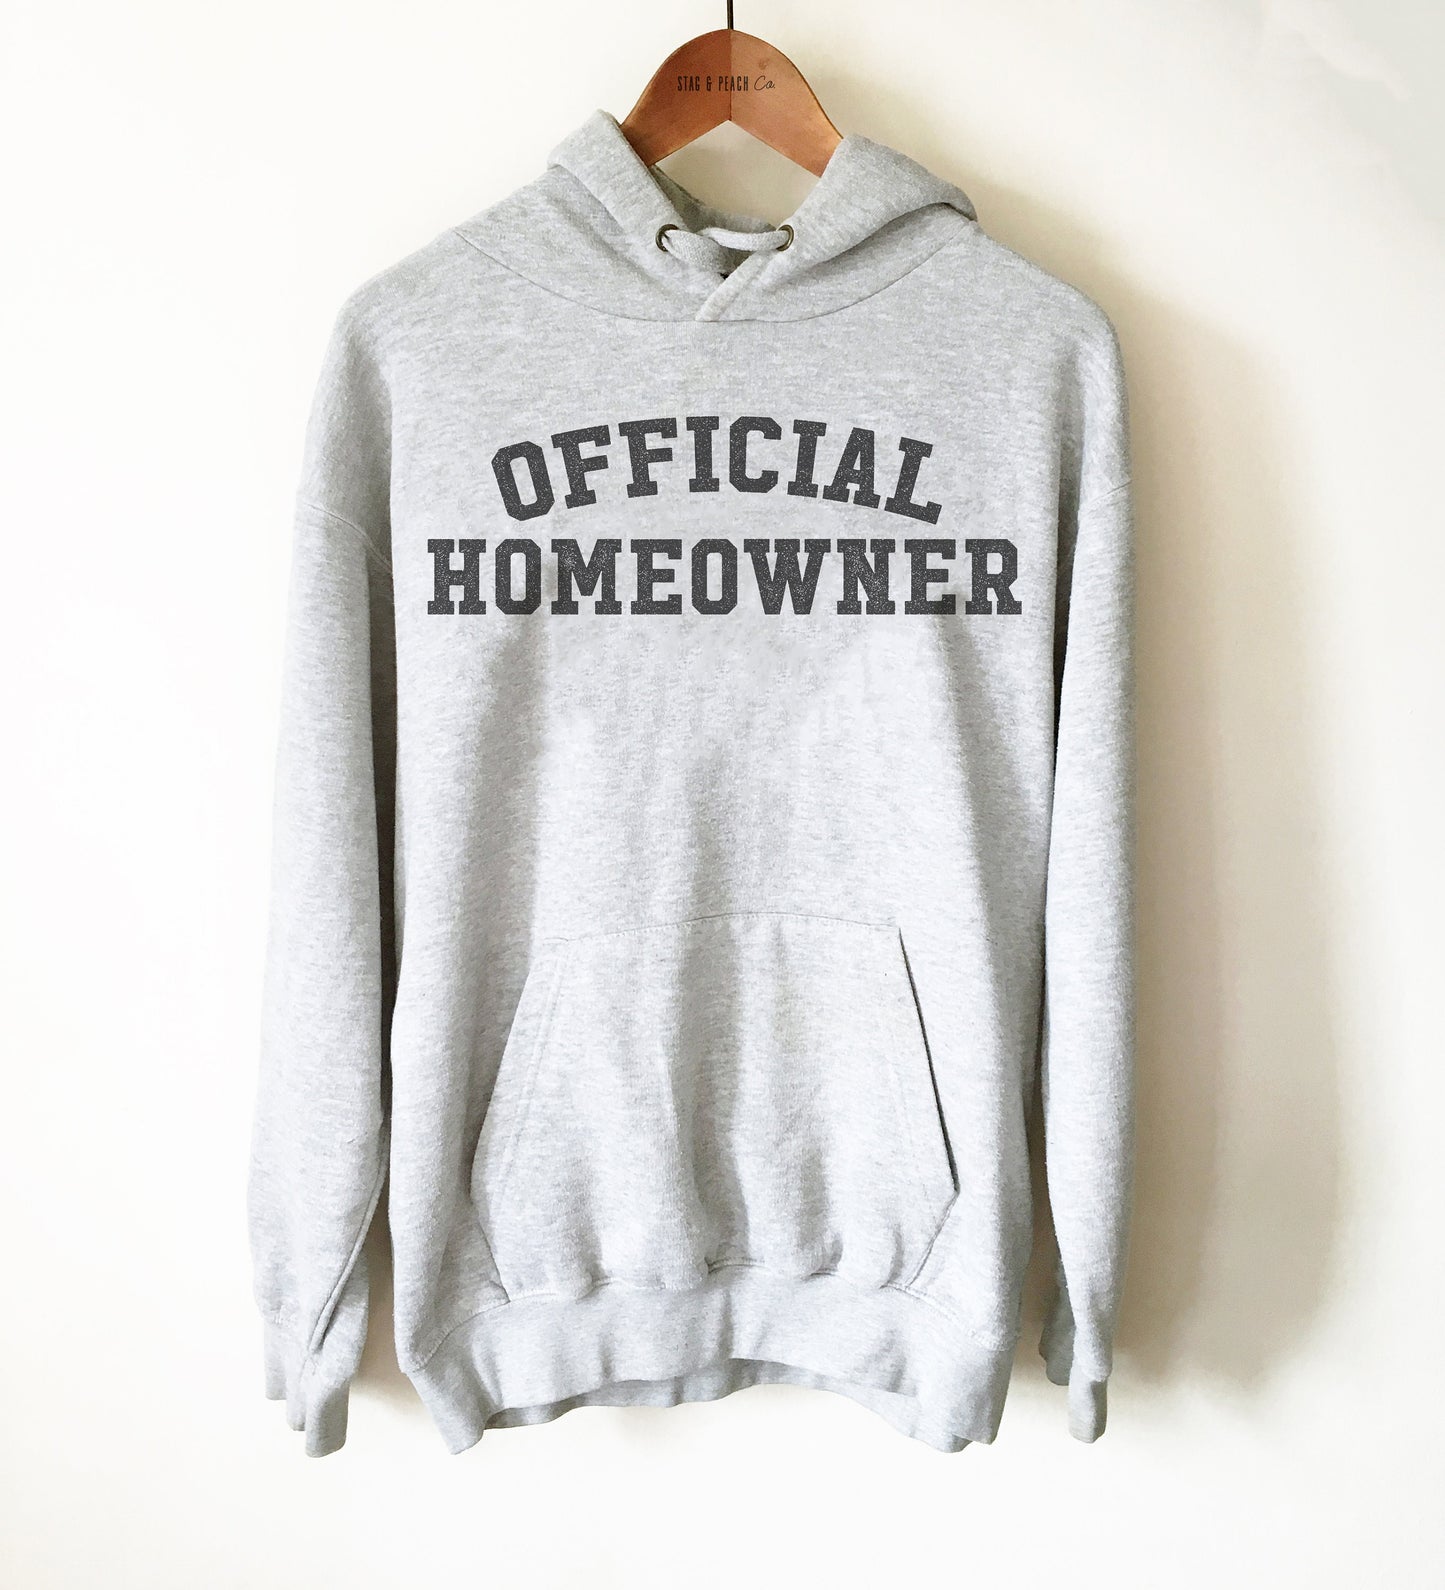 Homeowner Hoodie - First Time Buyer Shirt, Real Estate Shirt, Moving Gift, New House Gift, Housewarming Party Shirt, New Home Owner Shirt,